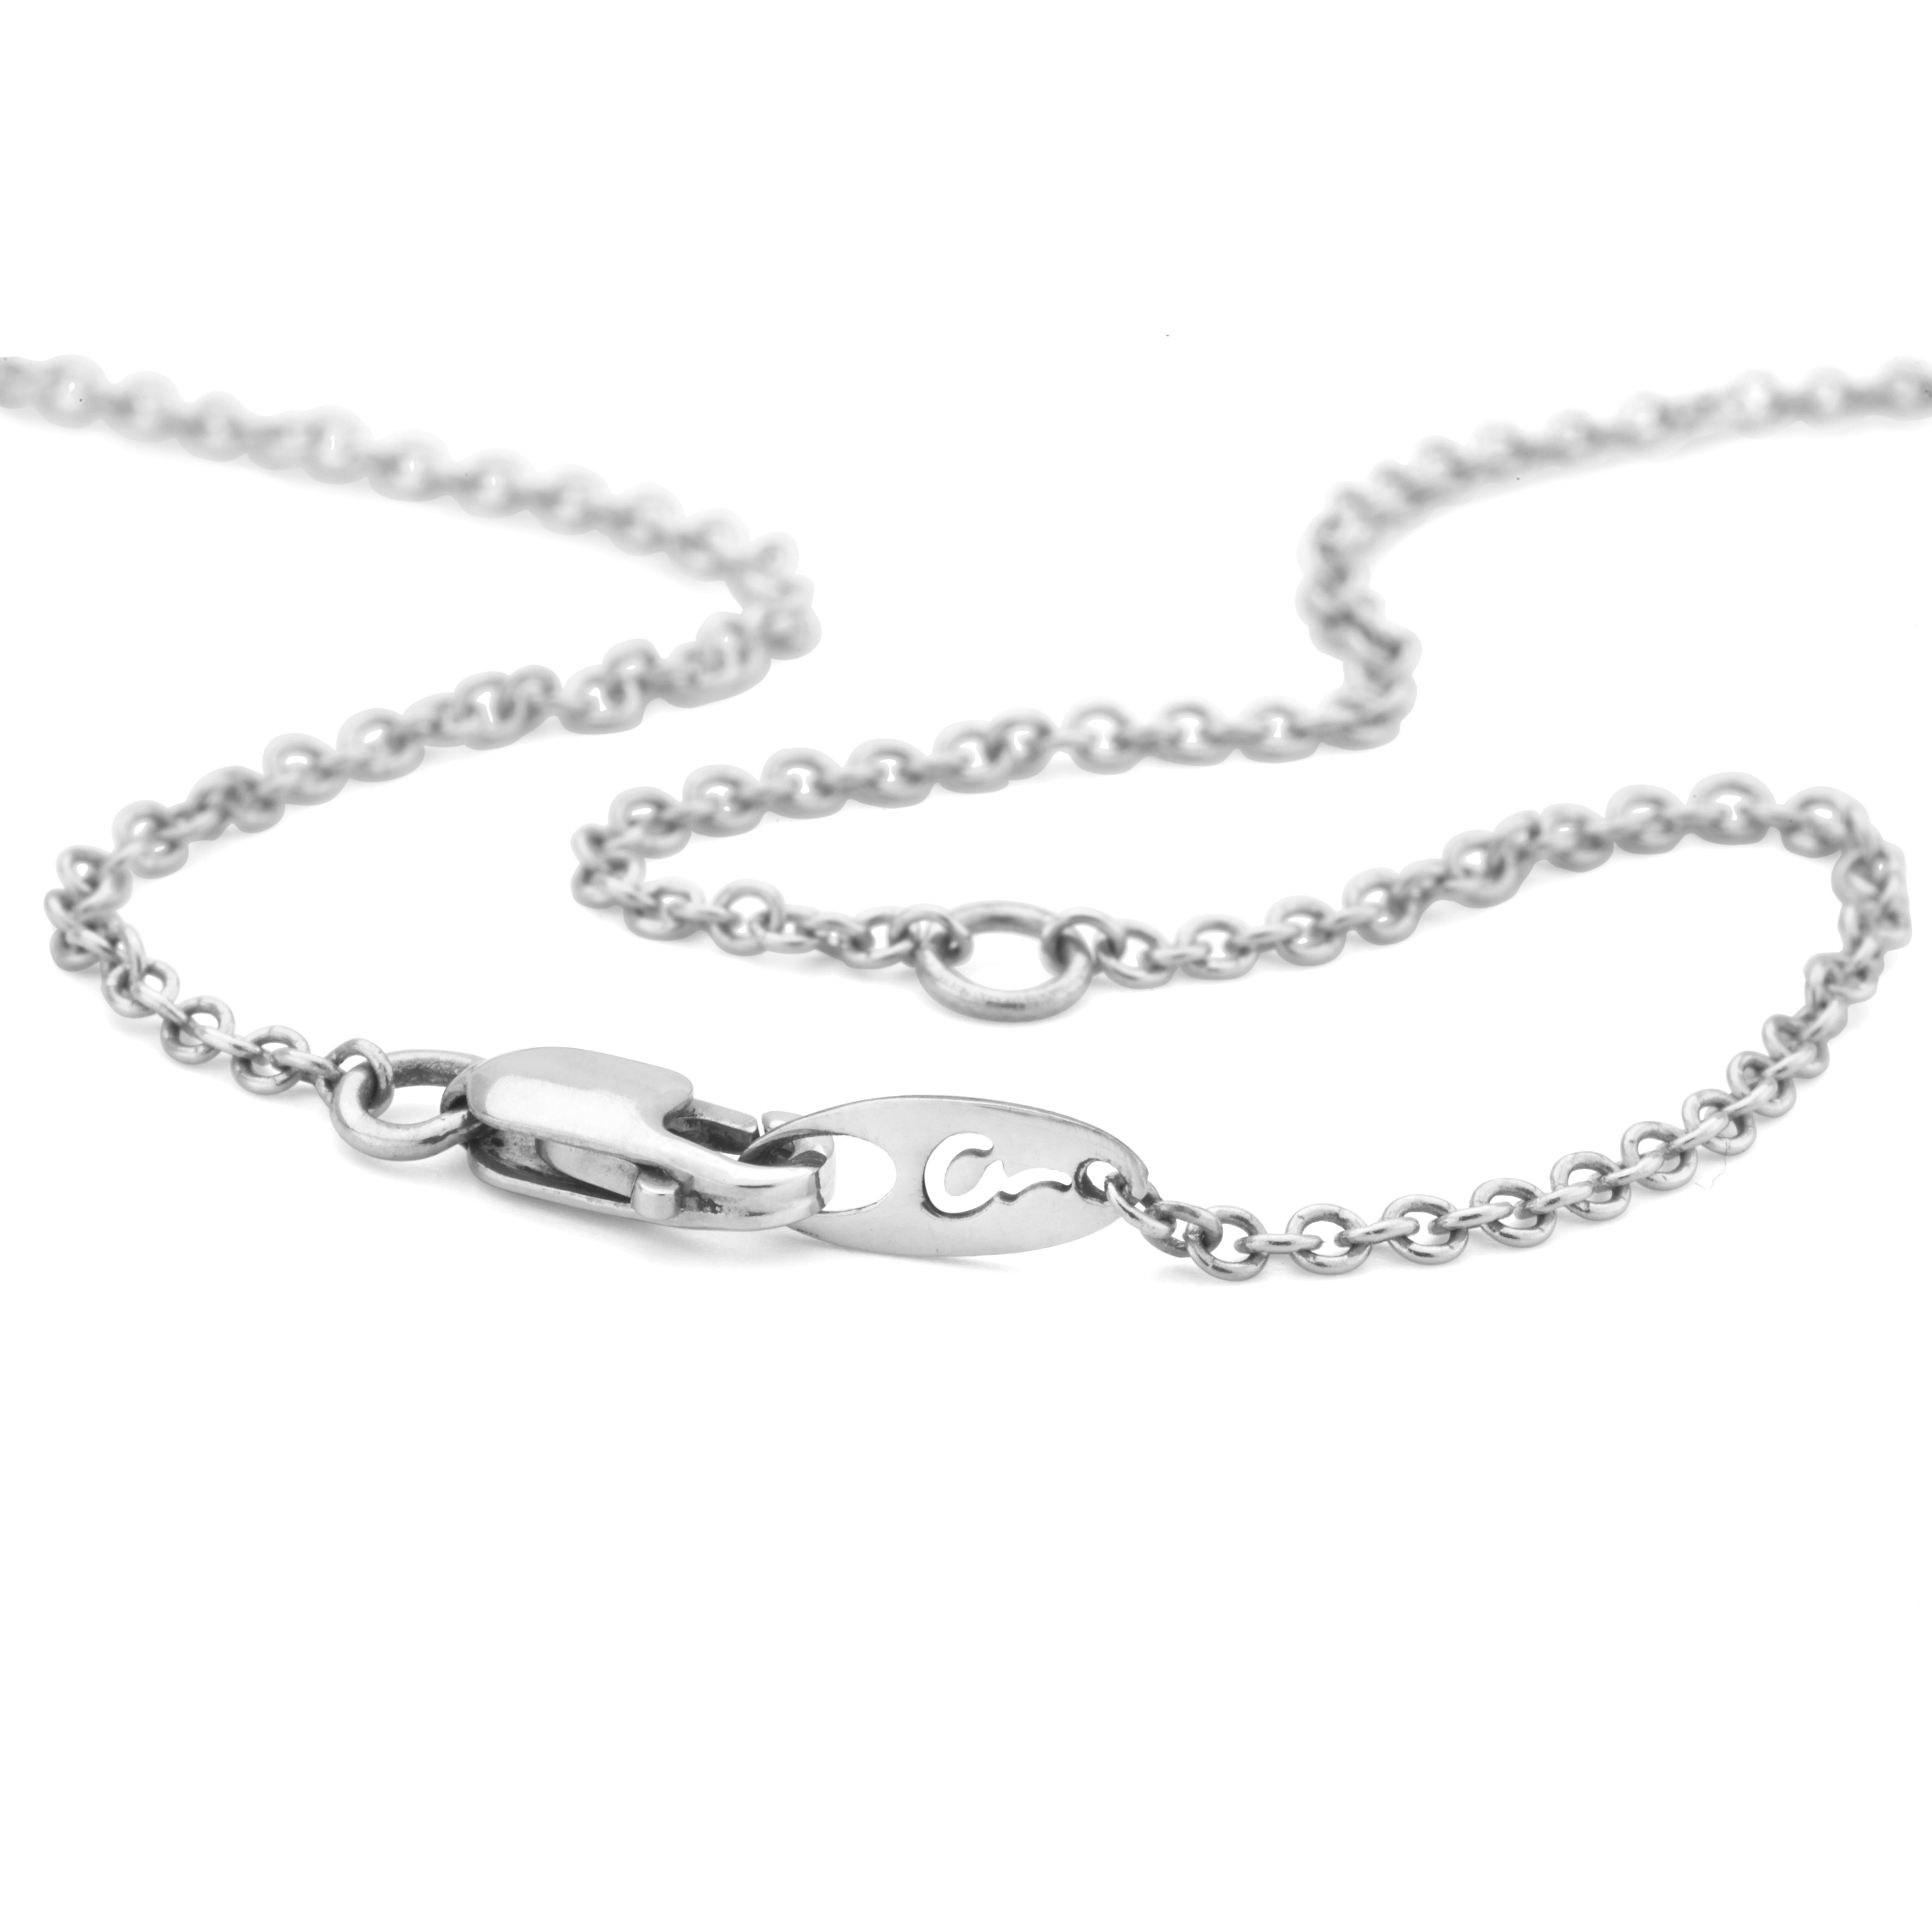 A.JAFFE  16" WHITE GOLD CHAIN WITH 2" EXTENDER